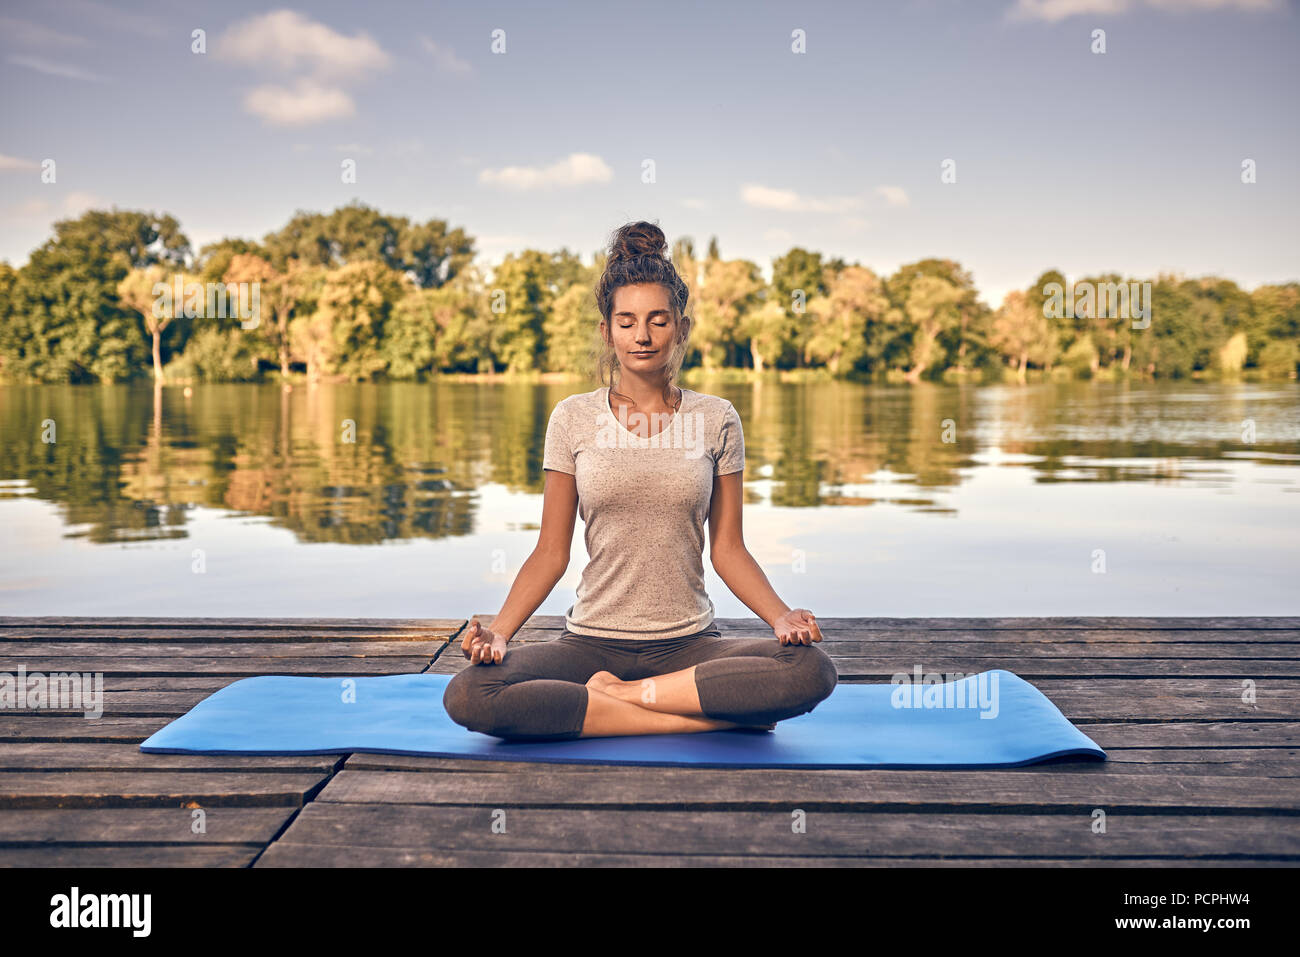 Smiling woman sitting meditating on a wooden deck Stock Photo